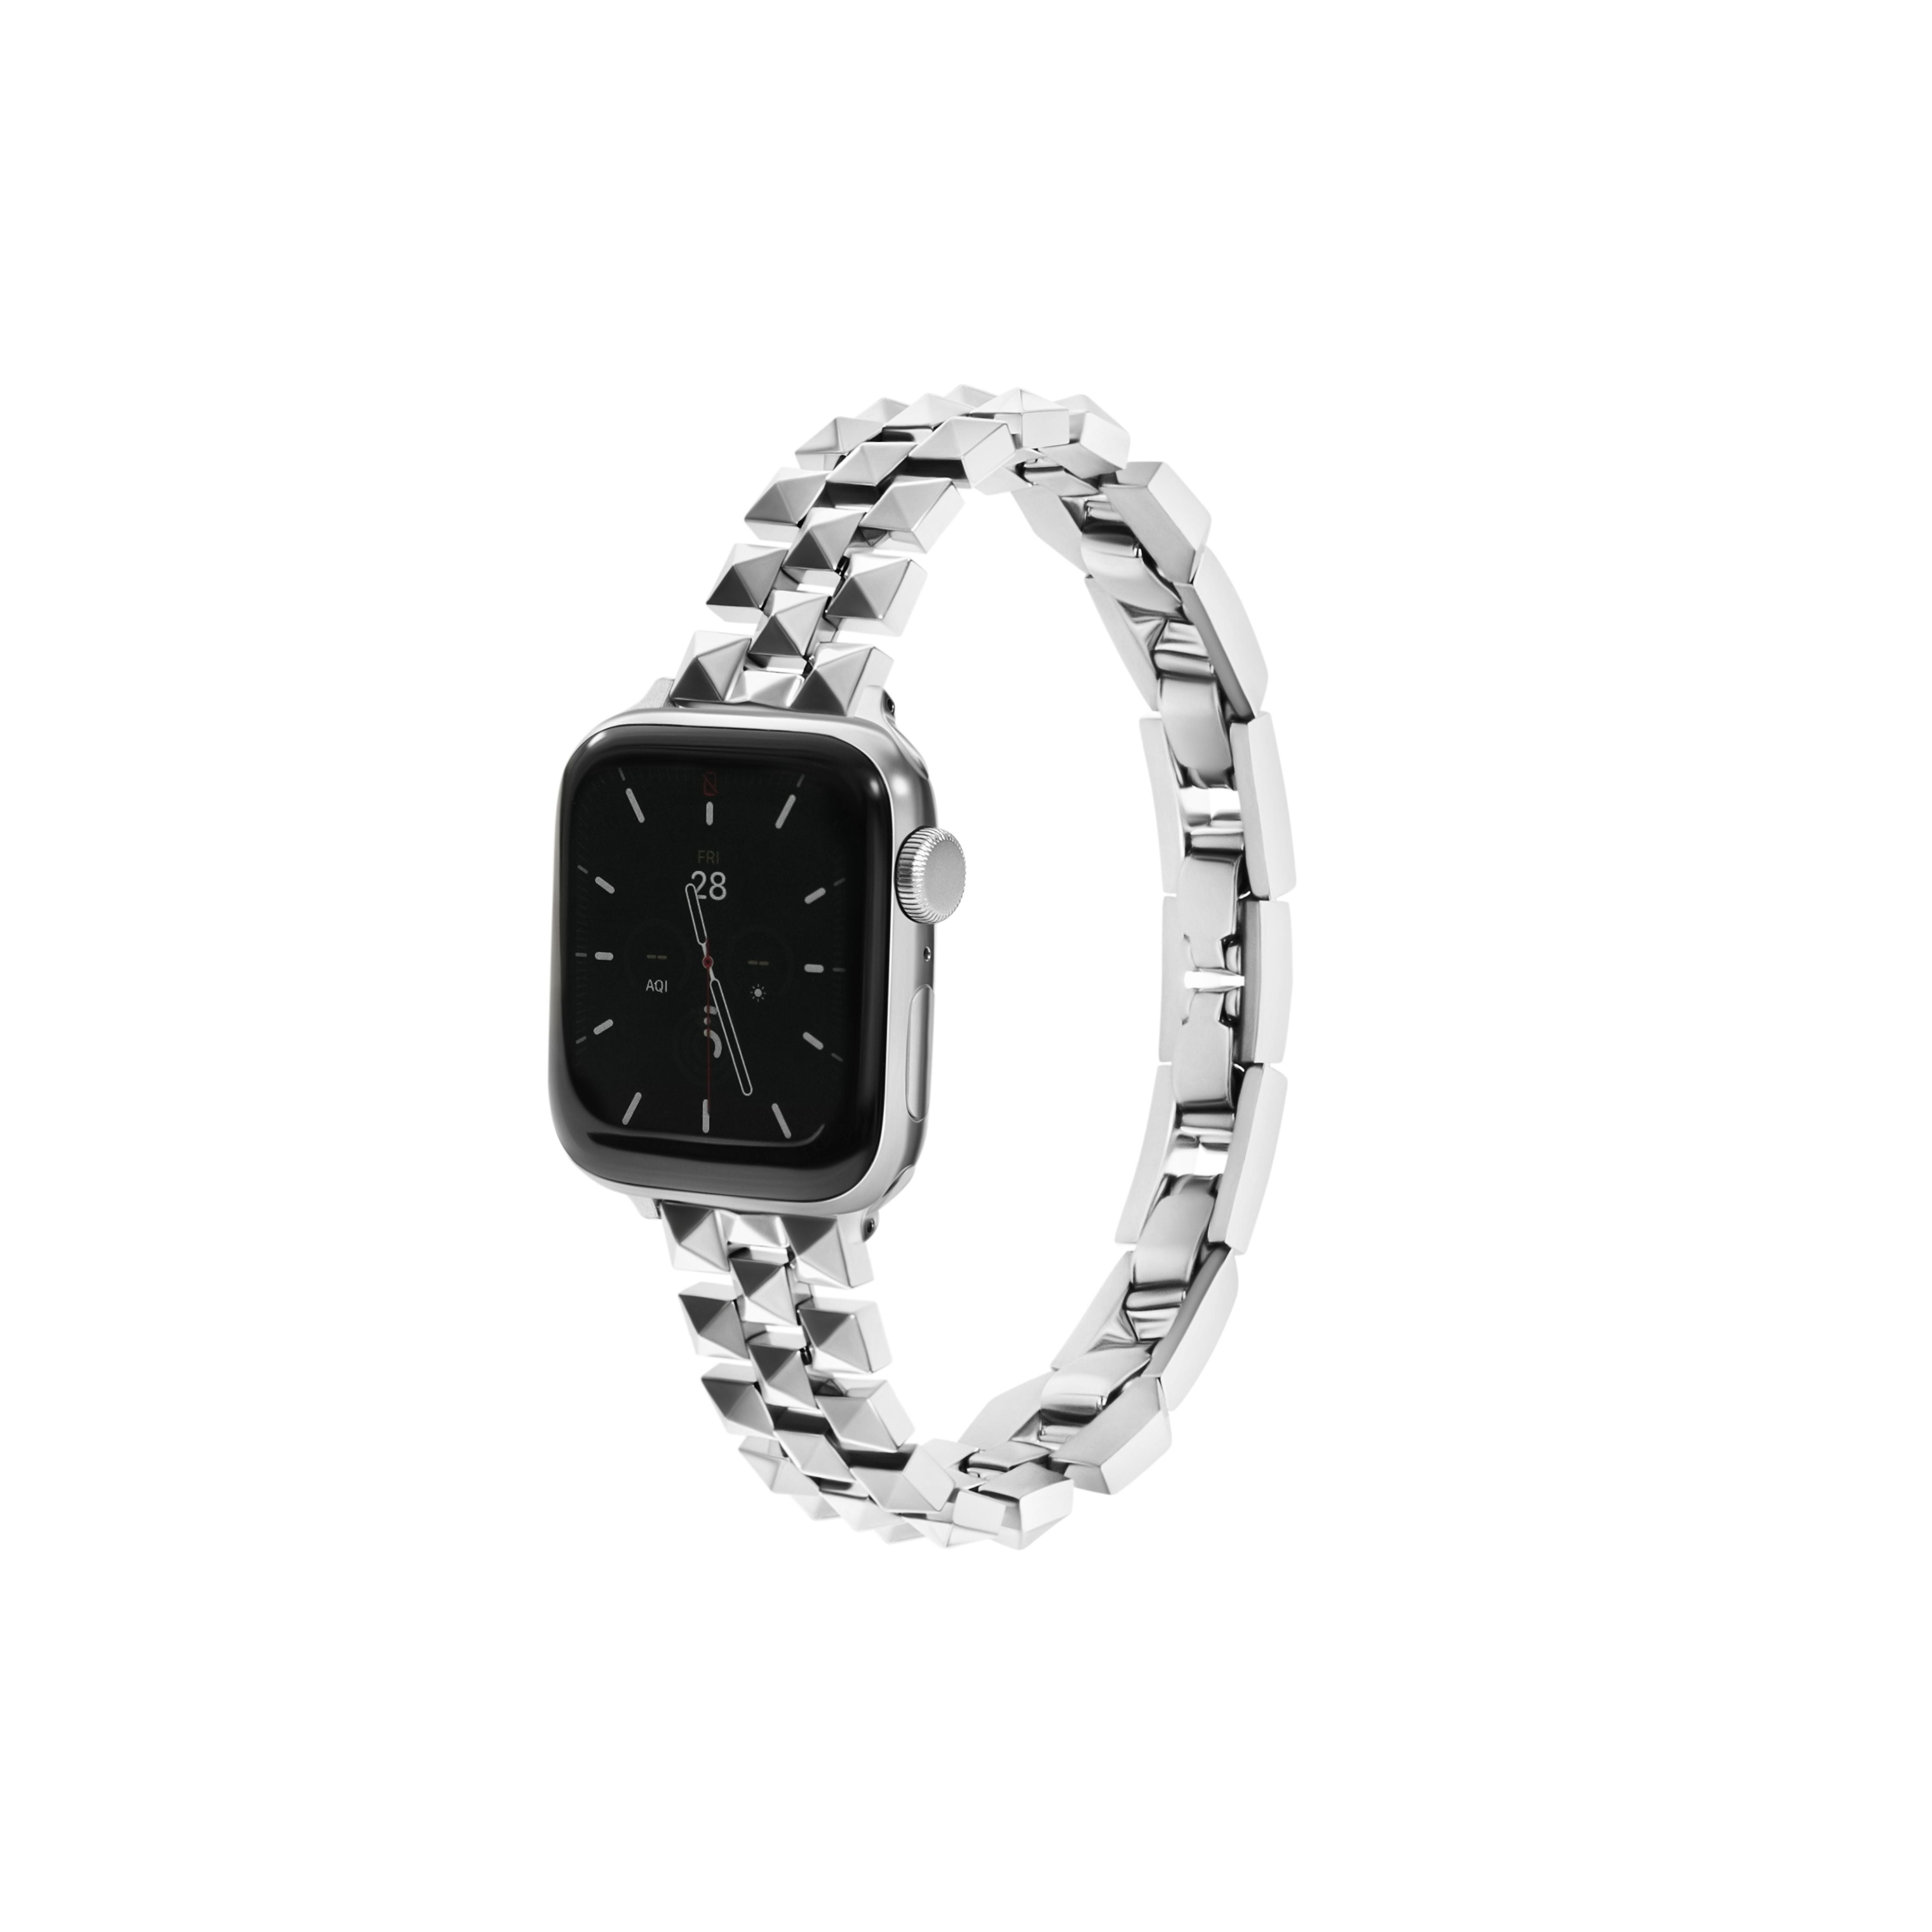 NEW! Stud Band for the Apple Watch - Goldenerre Women's Apple Watch Bands and Jewelry